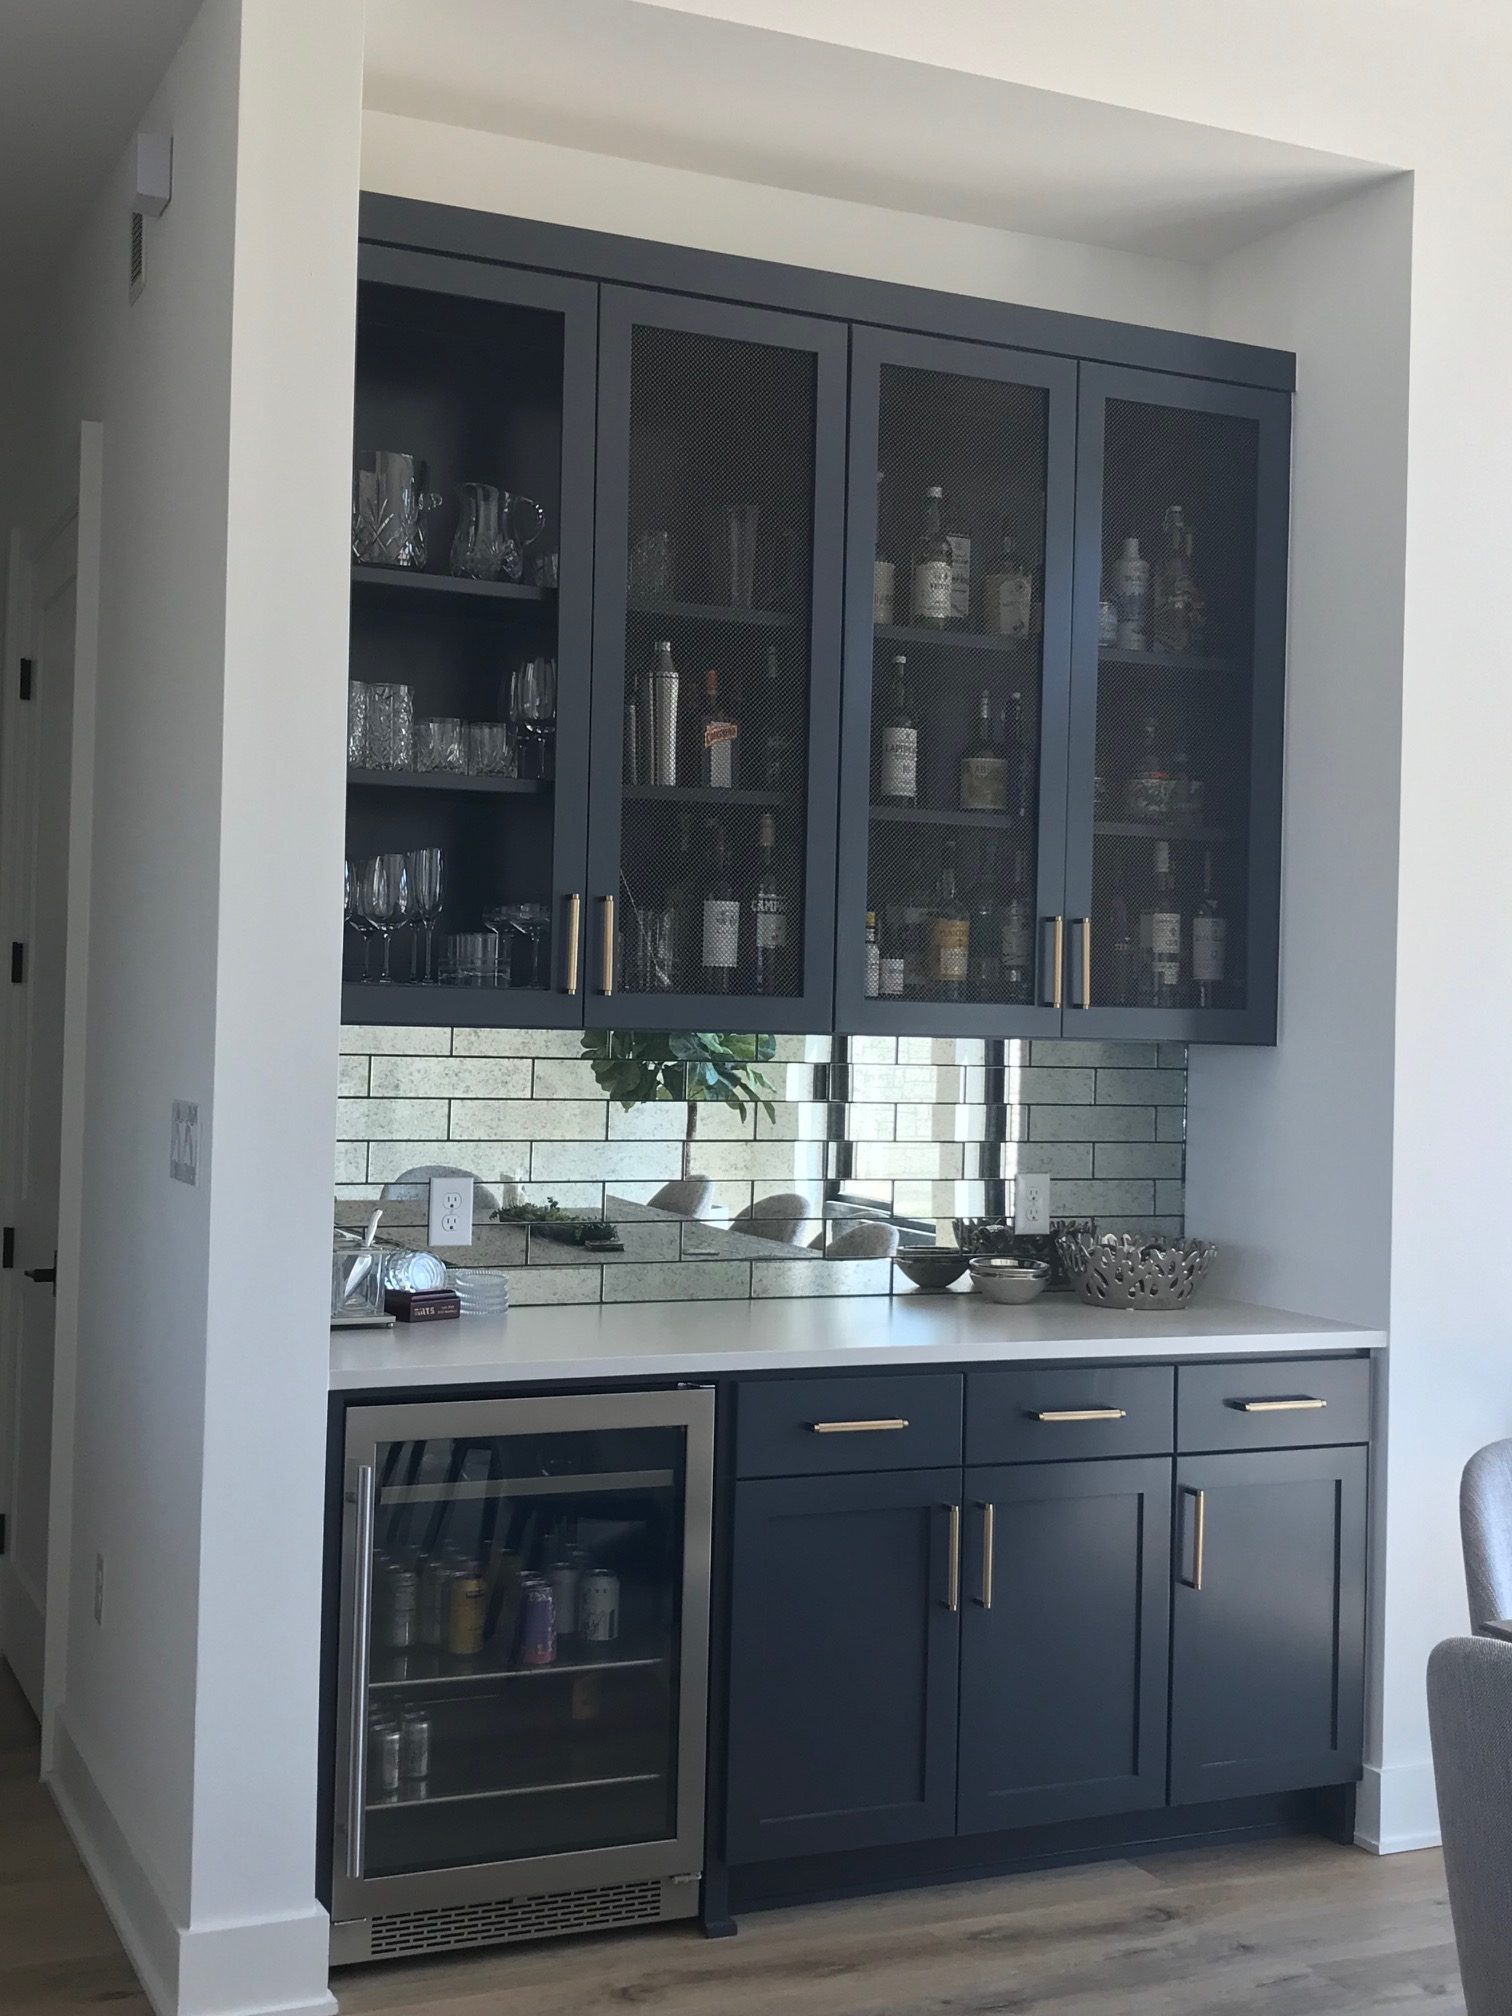 Cabinets & Shelf Staining in Texas